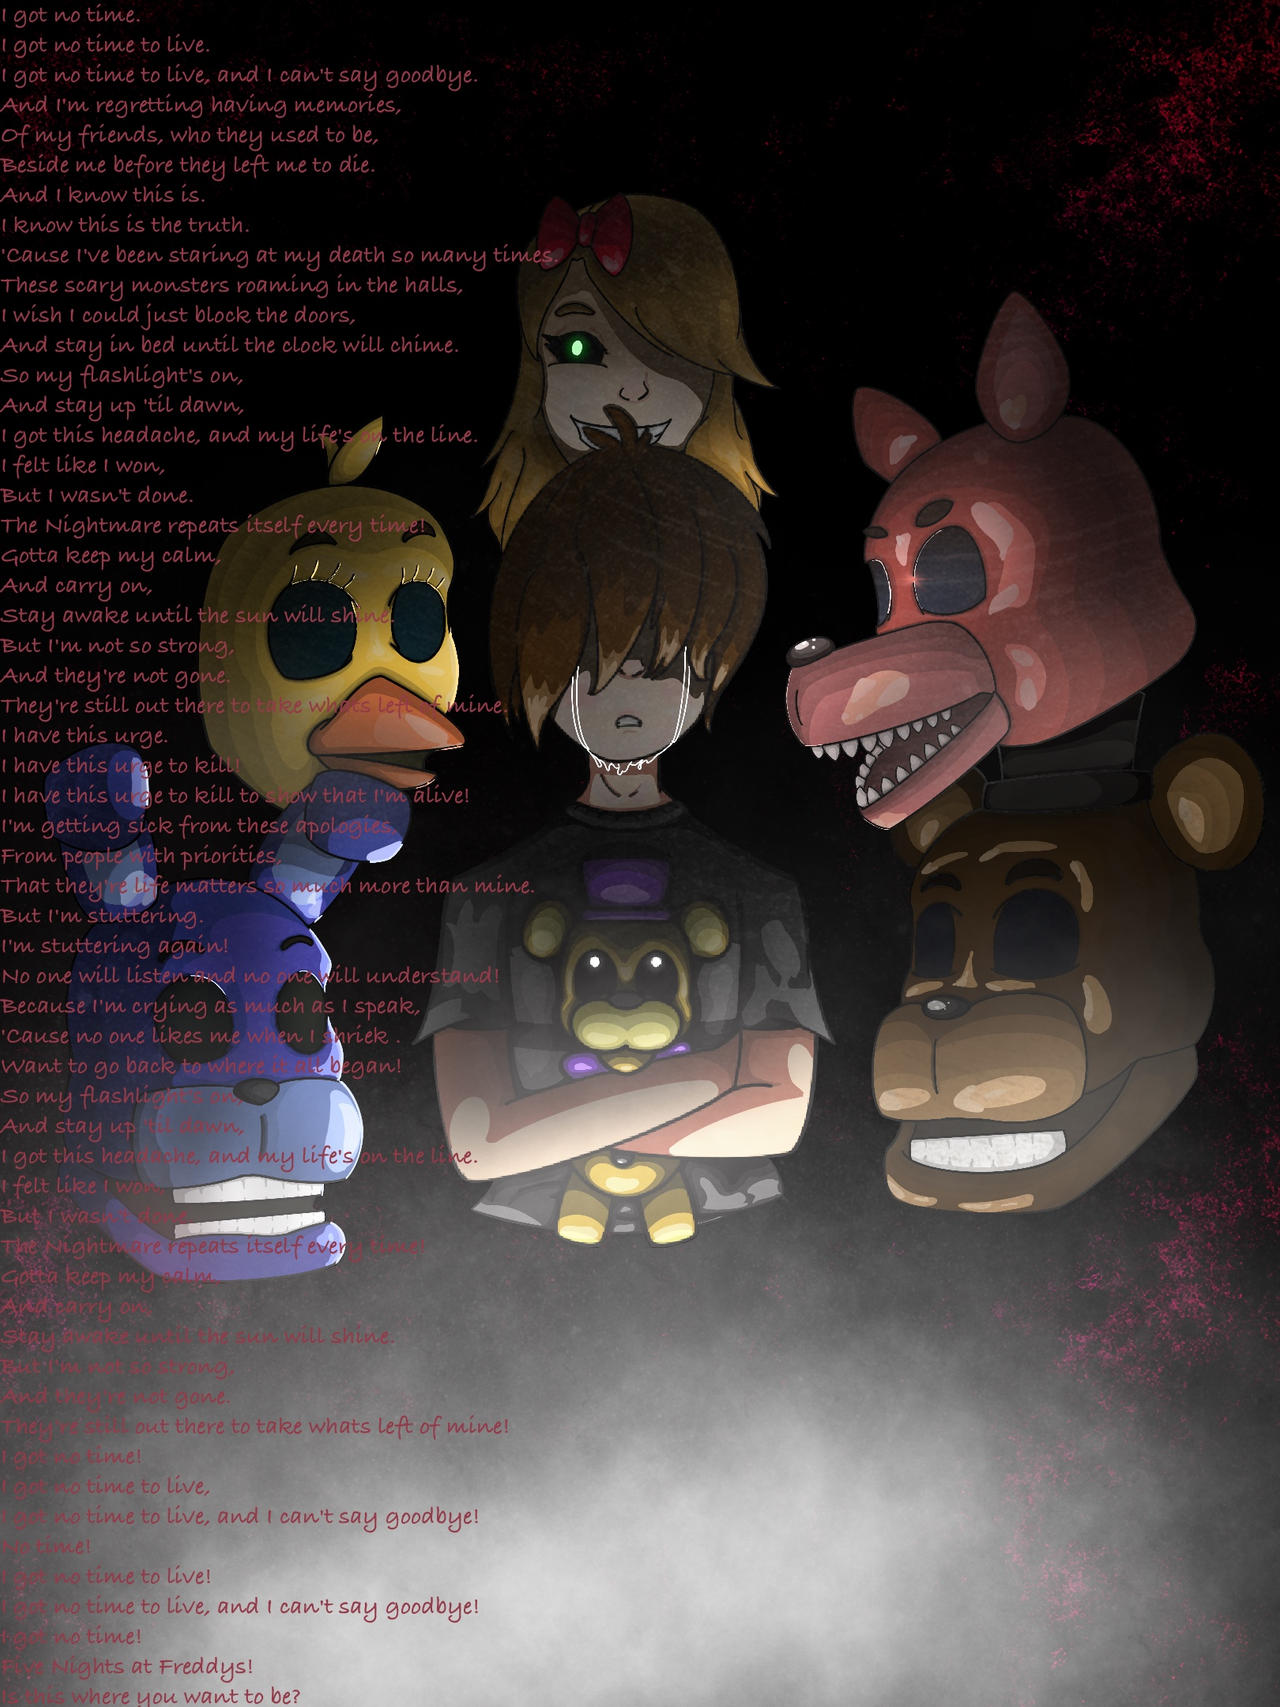 The Living Tombstone – Five Nights at Freddy's Lyrics